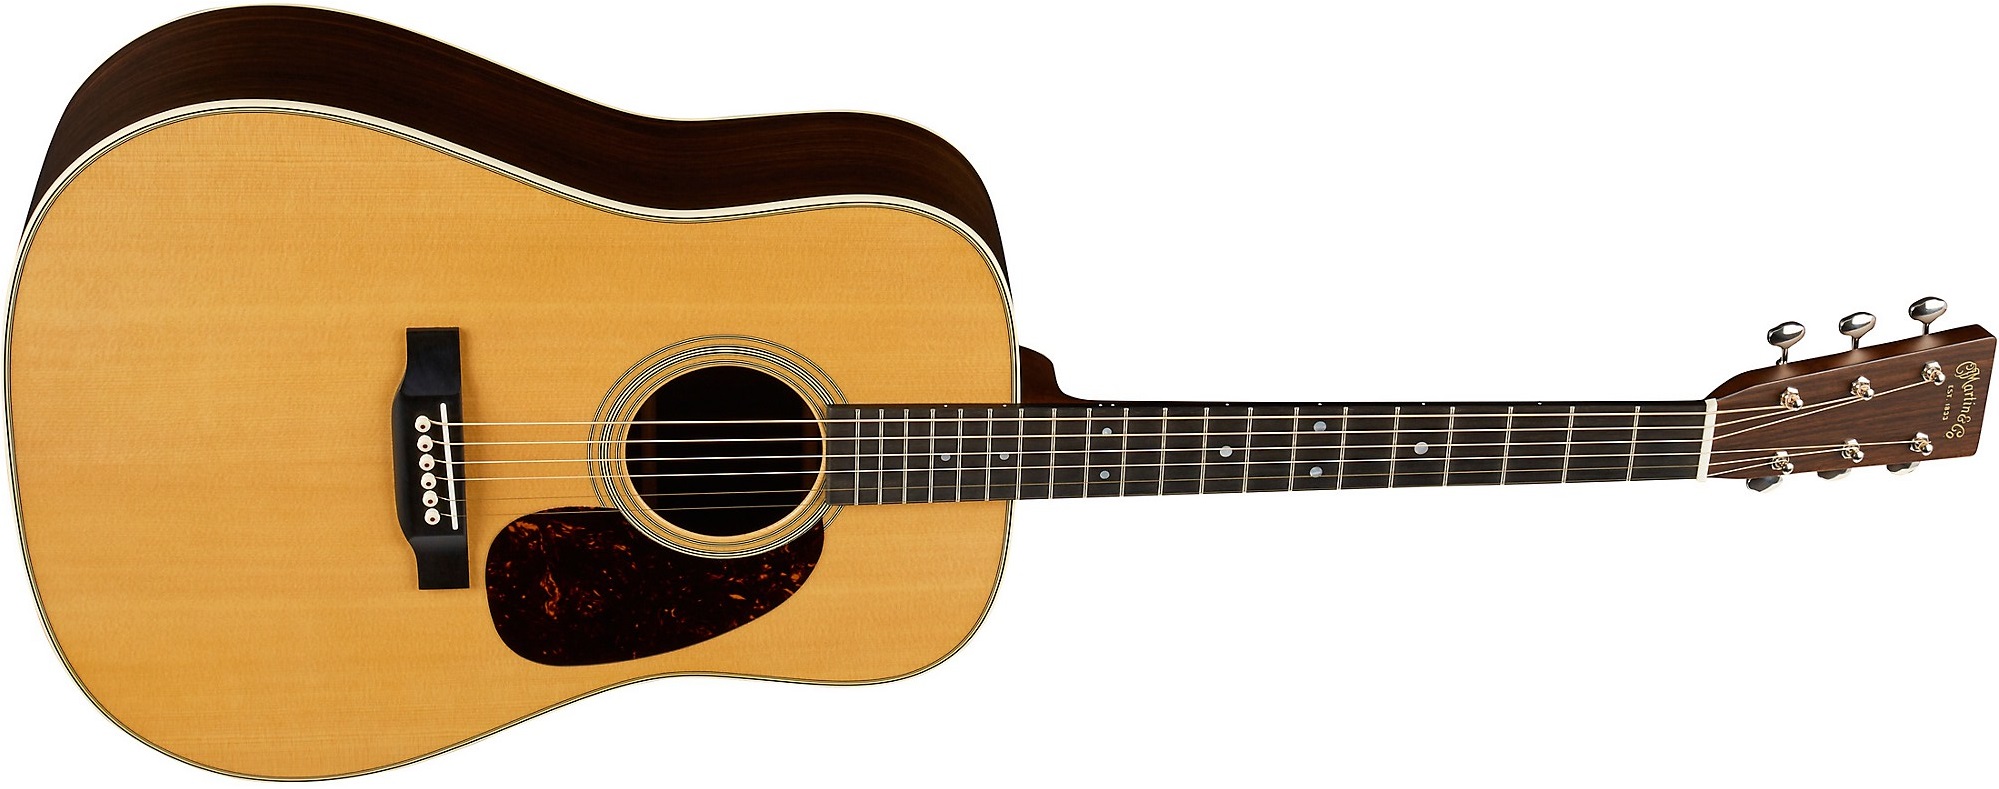 Martin D-28 Acoustic Guitar on a white background